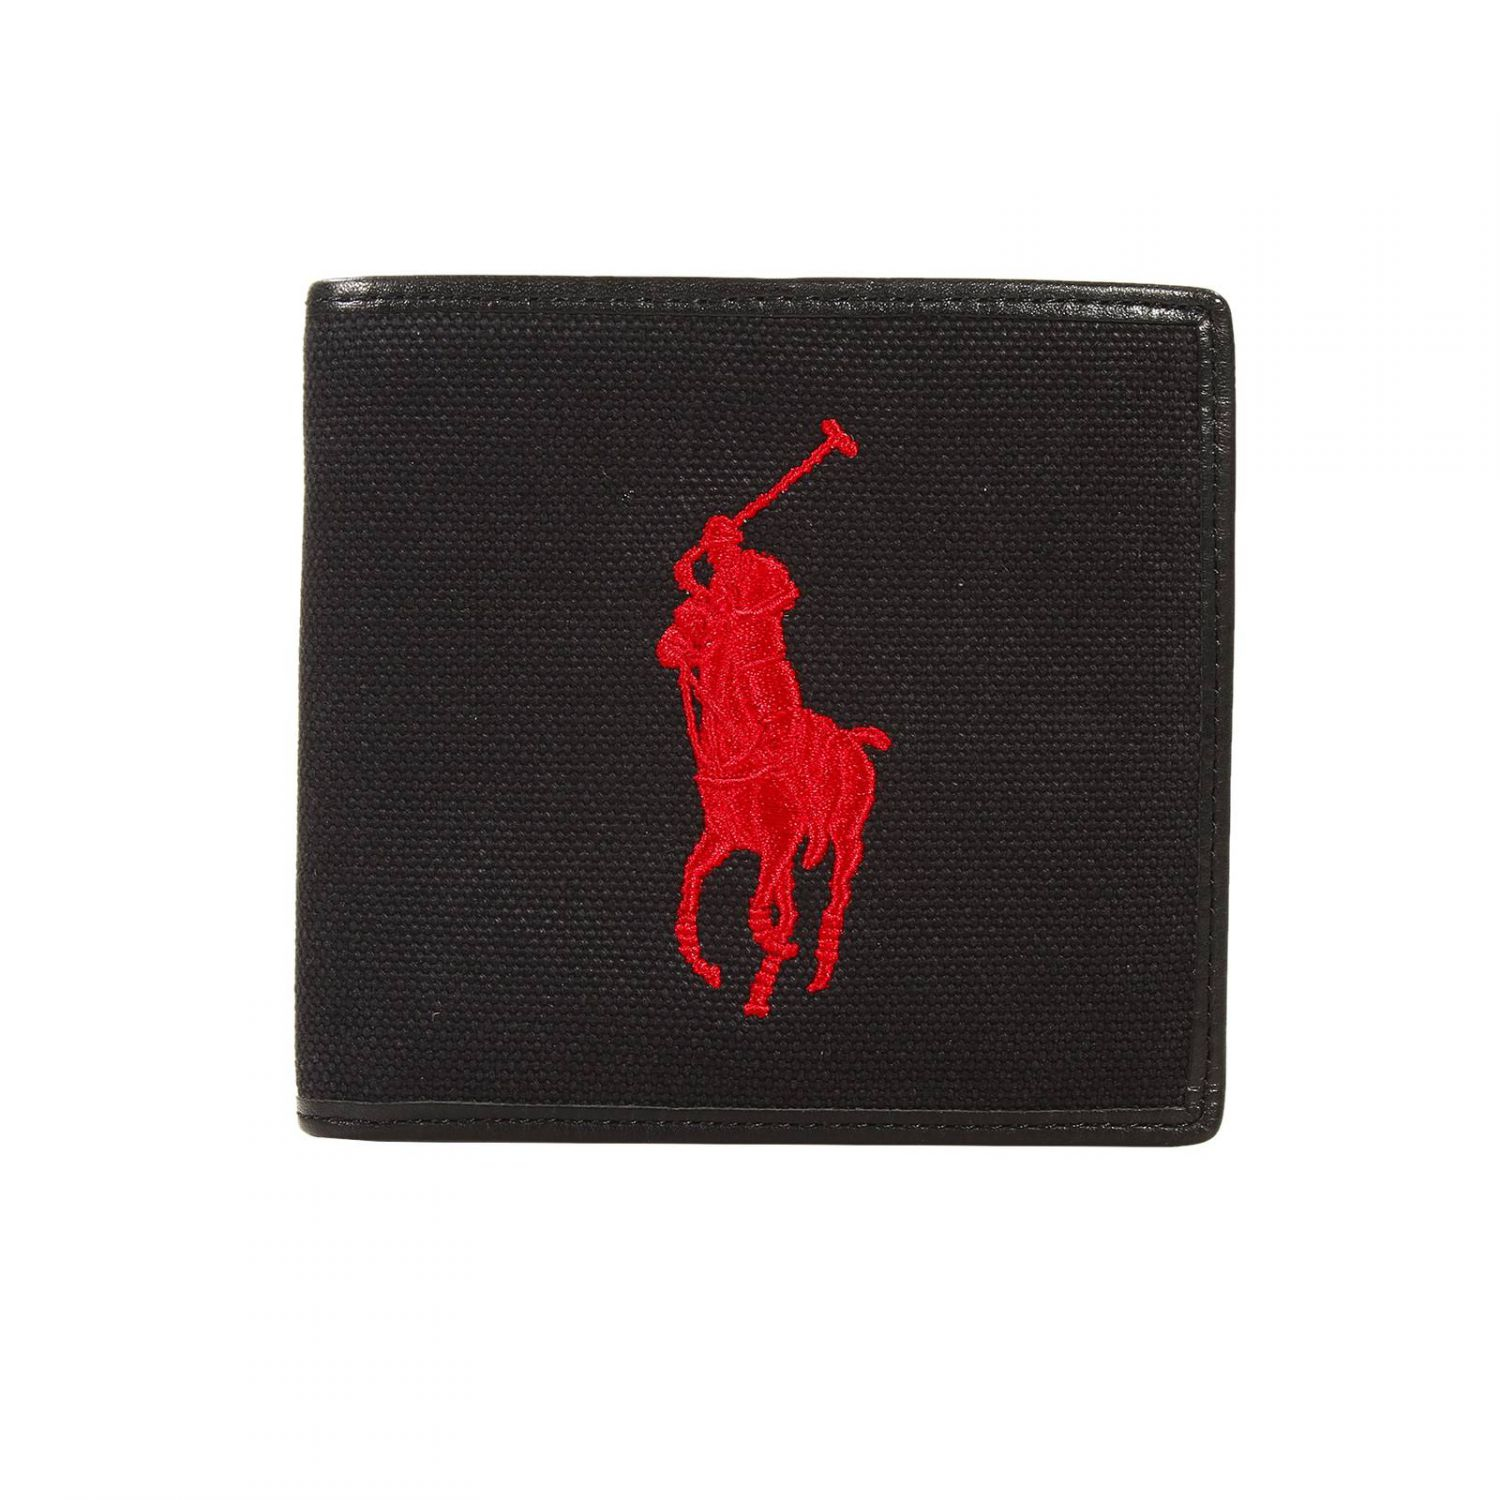 Lyst - Polo Ralph Lauren Wallet Leather And Canvas With Big Pony Embroidery Credit Cards Slots ...